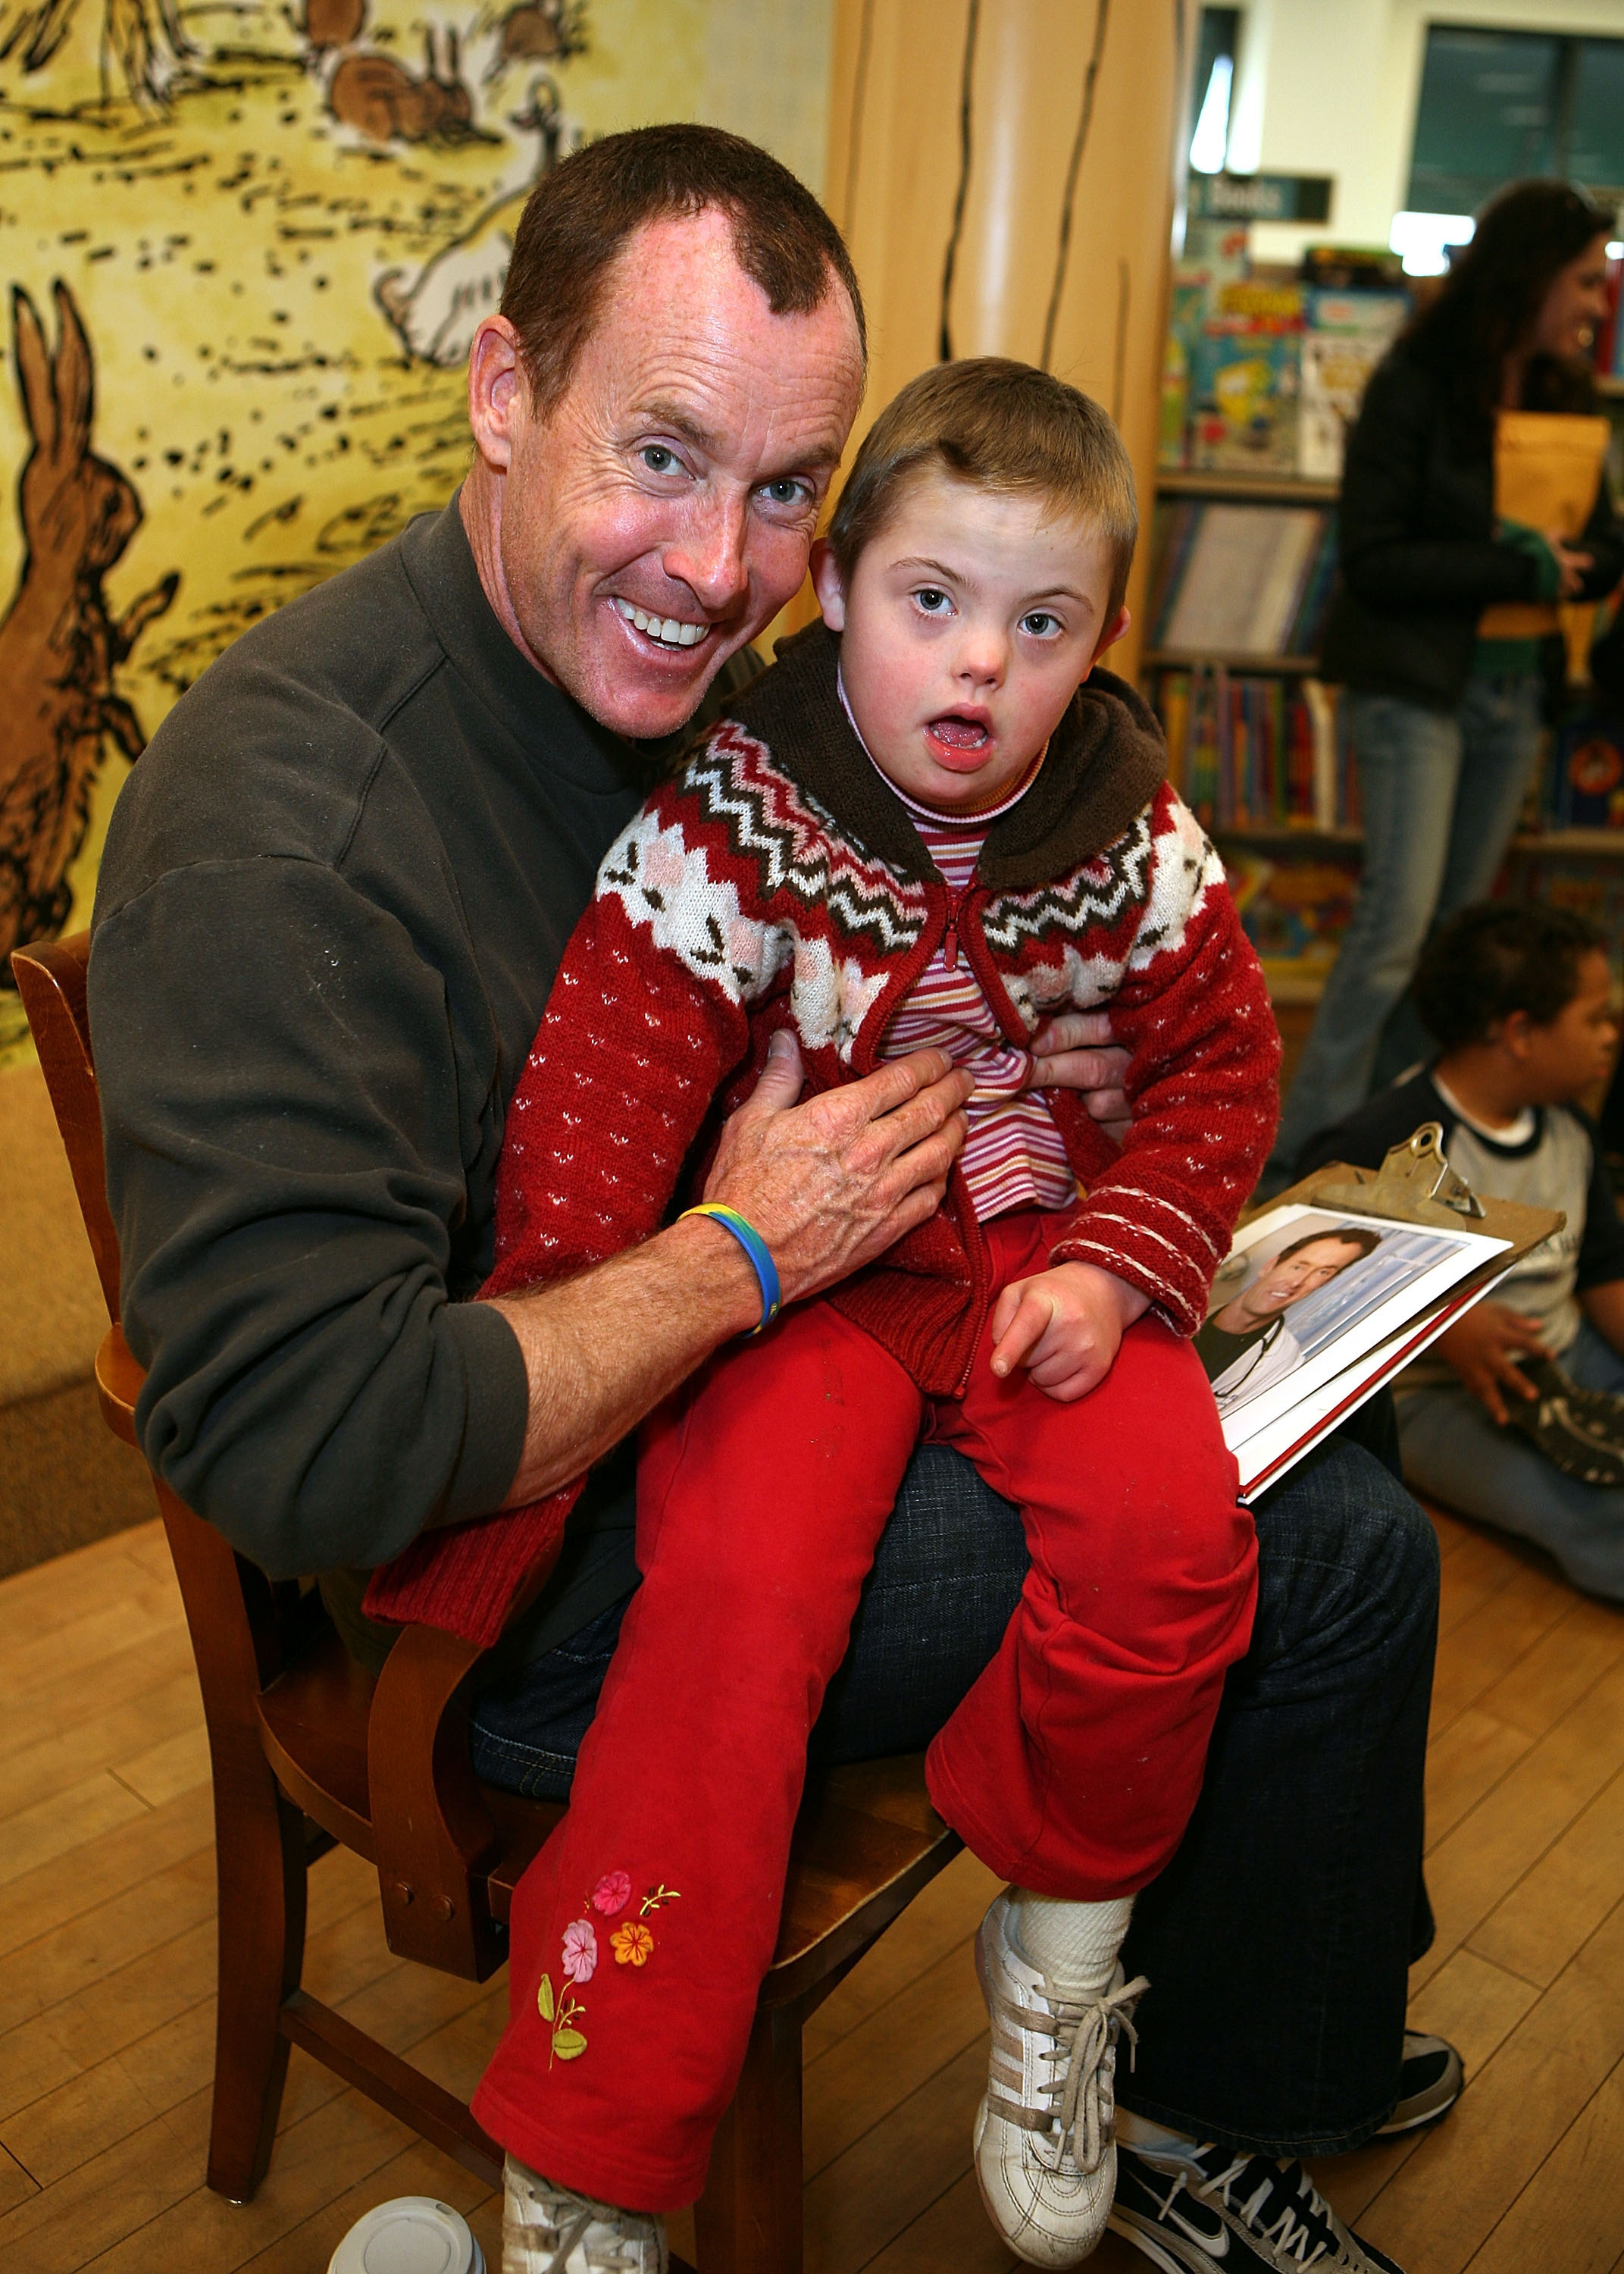 John C. McGinley taking pictures after a reading for children with Down Syndrome at Barnes Barnes & Noble in California in 2007 | Source: Getty images